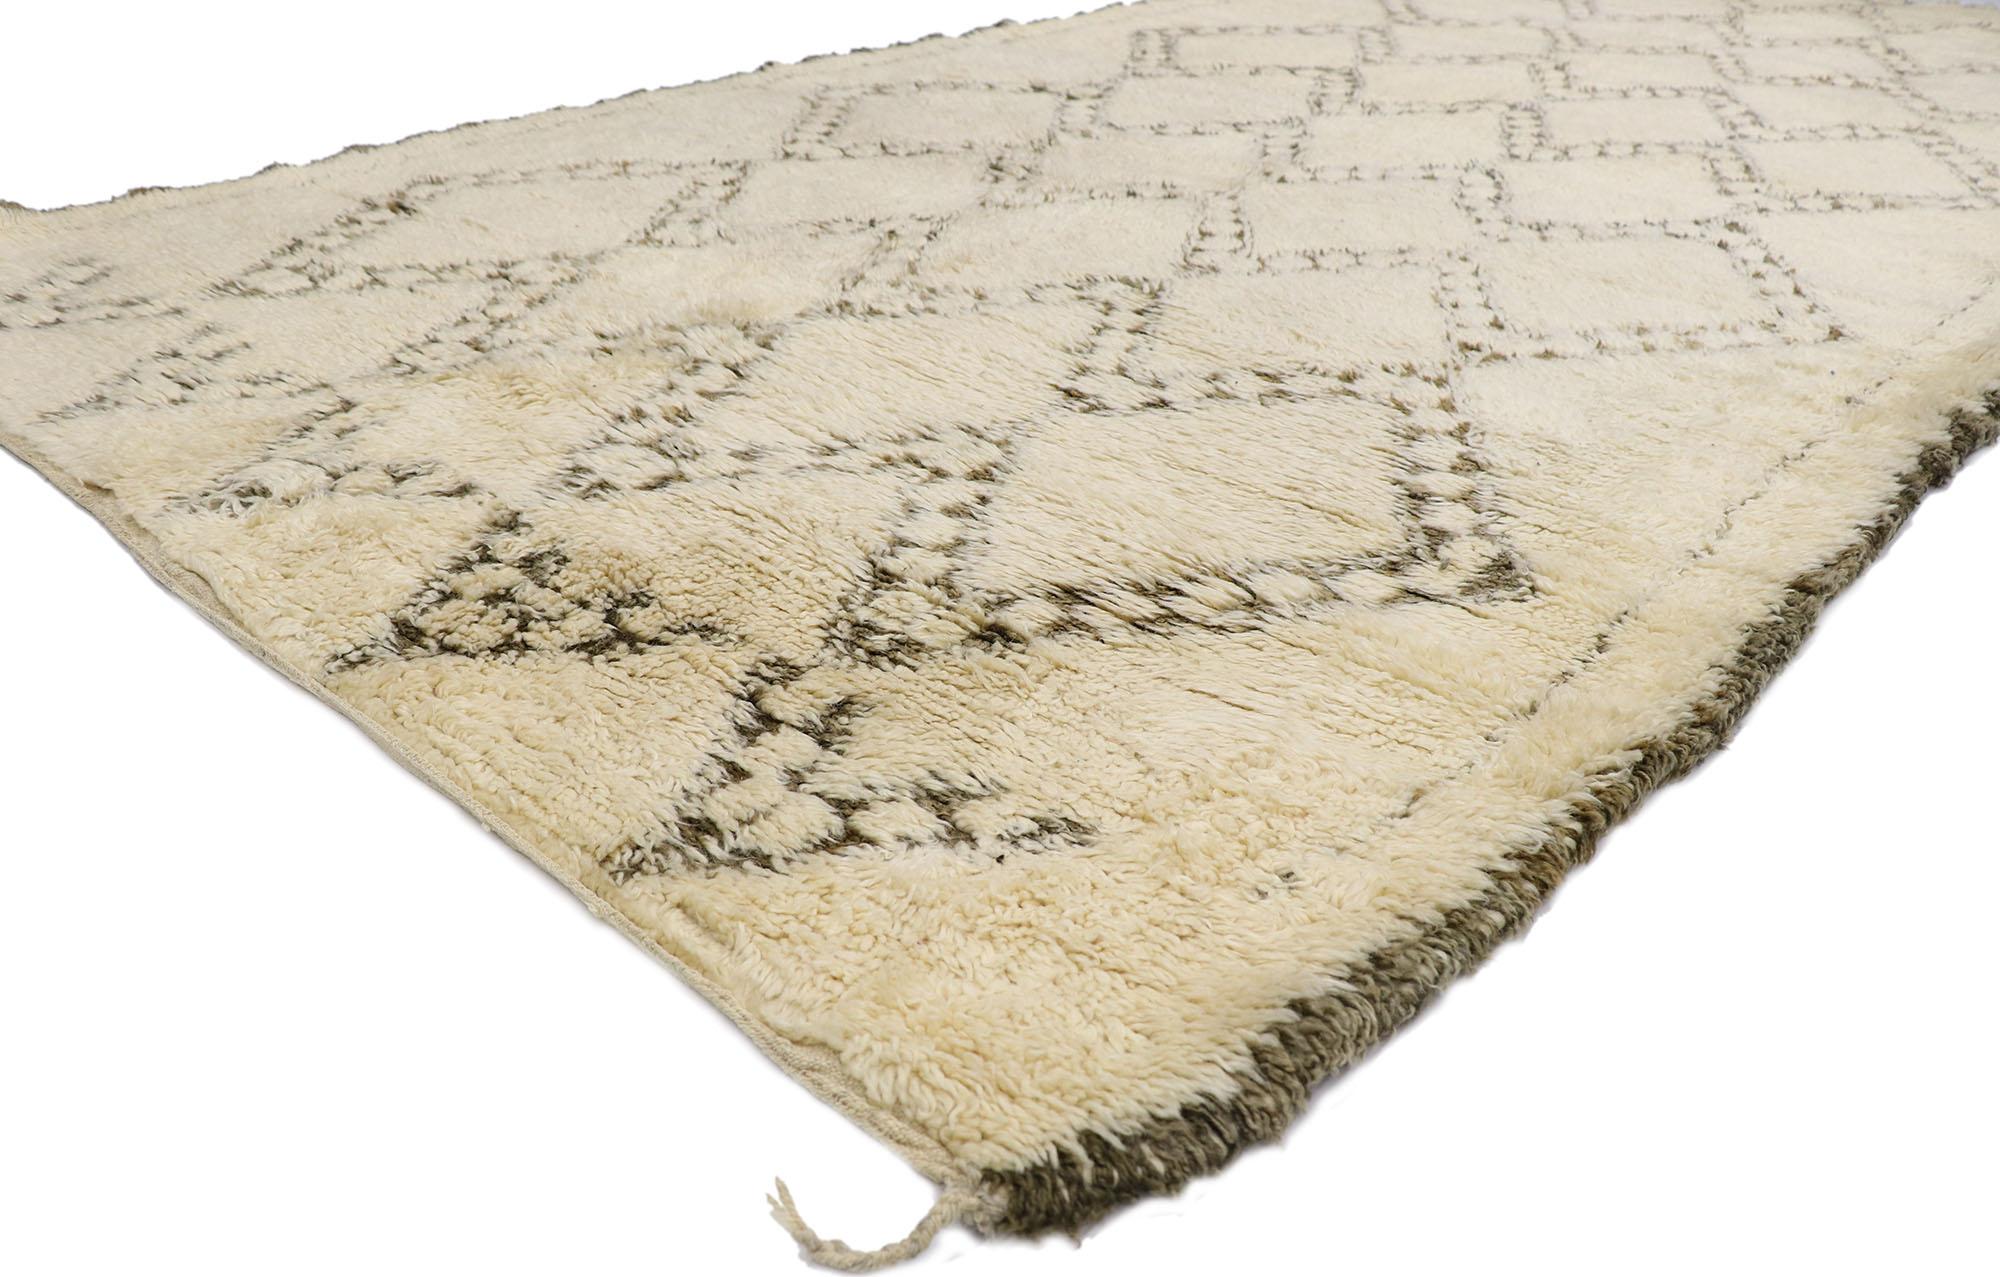 21372 Vintage Berber Beni Ourain Moroccan rug with Mid-Century Modern Style 06'05 x 13'07. With its simplicity, plush pile and Mid-Century Modern style, this hand knotted wool vintage Berber Beni Ourain Moroccan rug is a captivating vision of woven